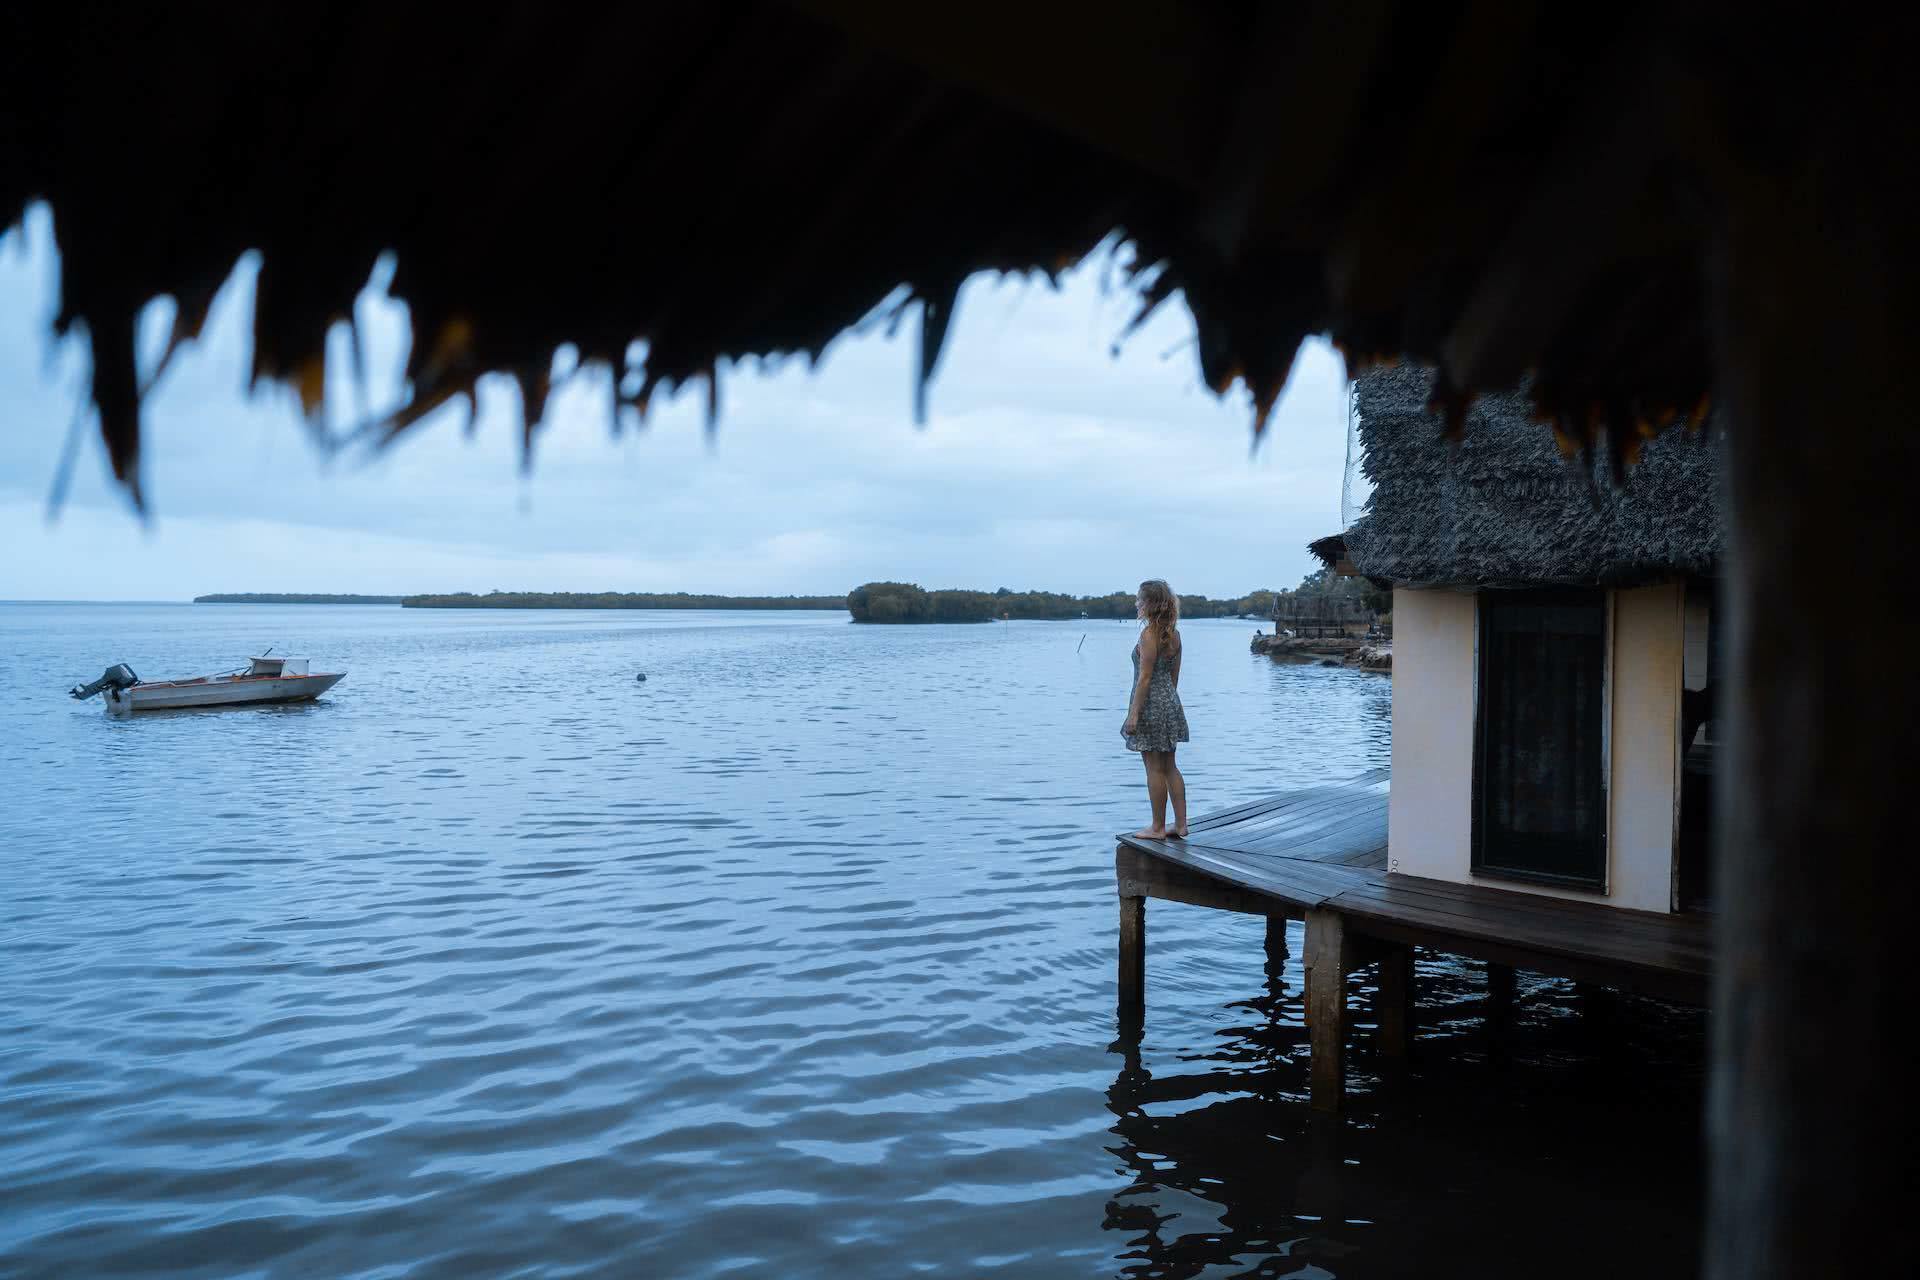 The Best Places to Stay in the Outer Islands of Vanuatu, photos by Ben Savage and Ain Raadik, Ruby Claire, Maskelyns islands Batis Seaside Bungalow, ocean, woman, accommodation